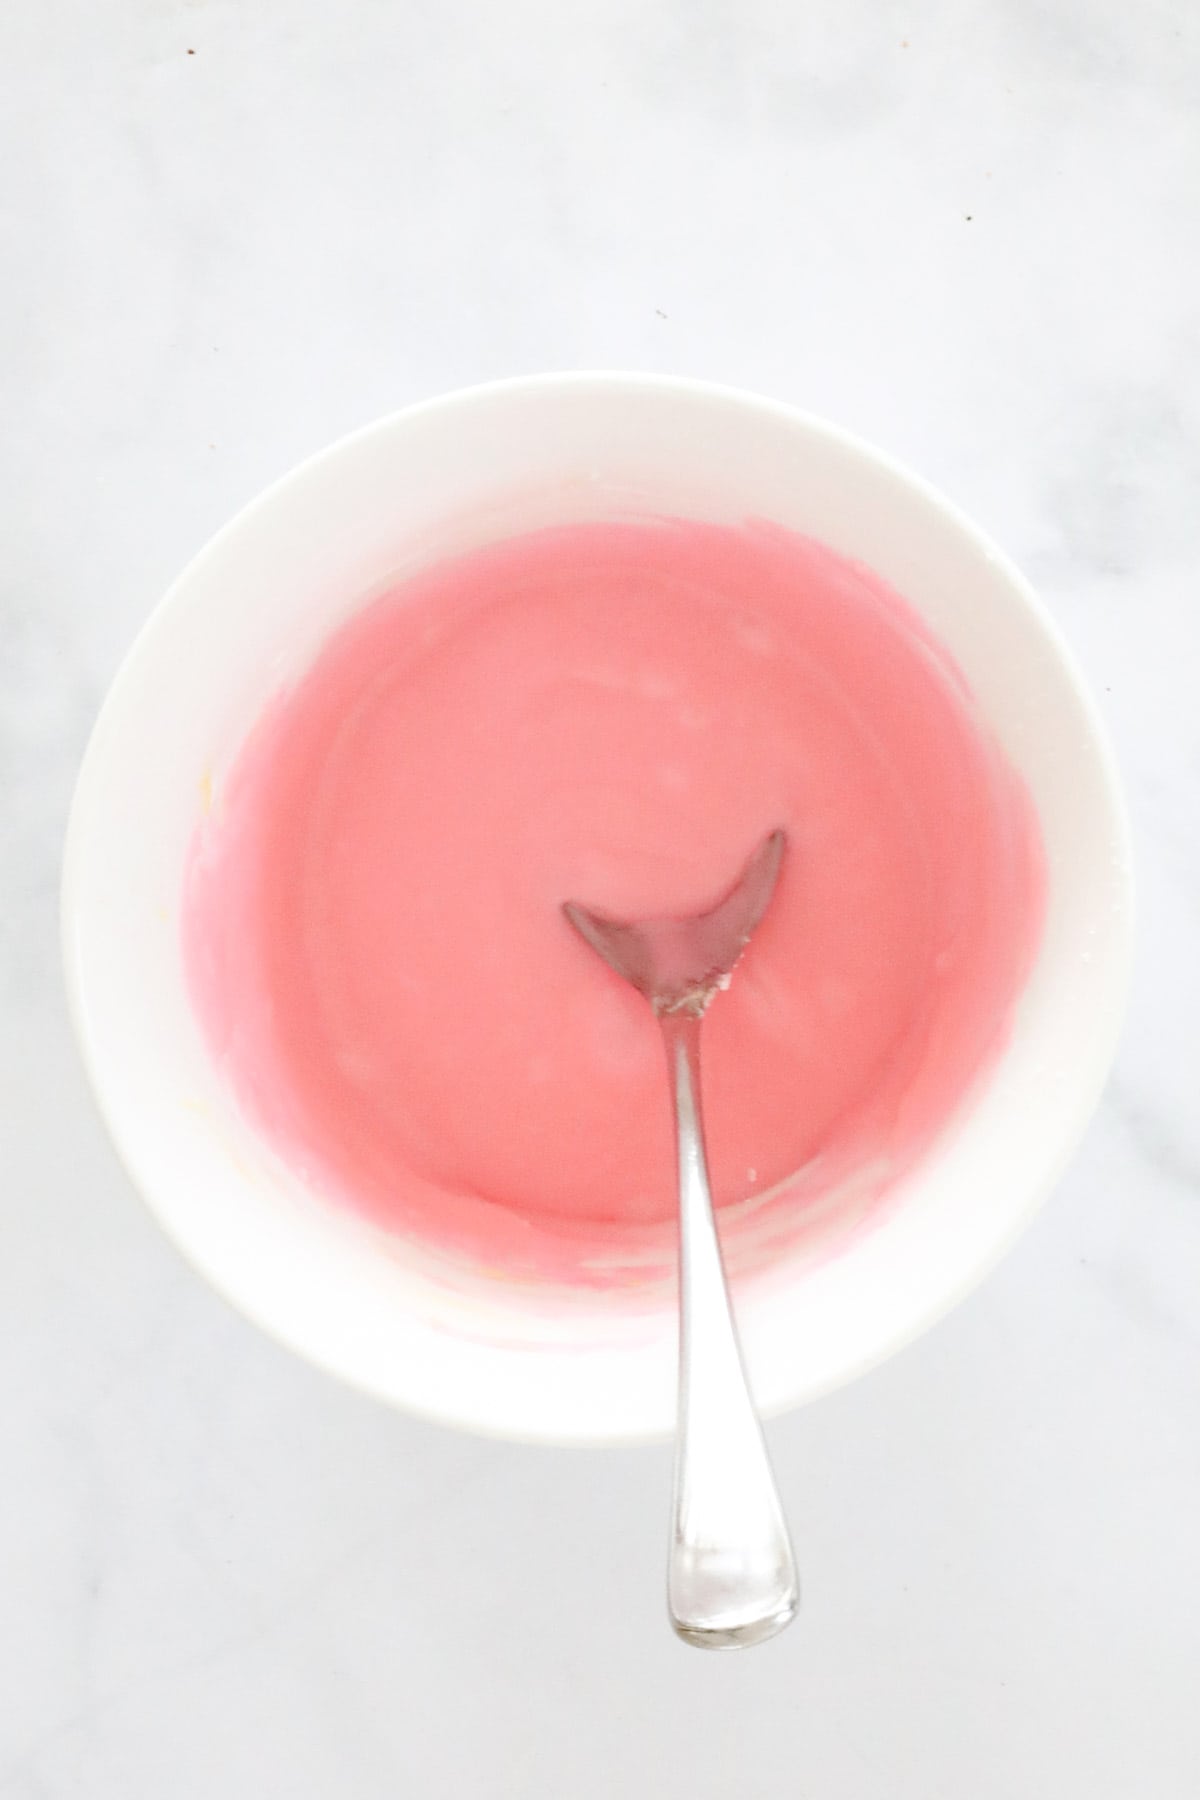 Pink icing mixed together in a bowl.